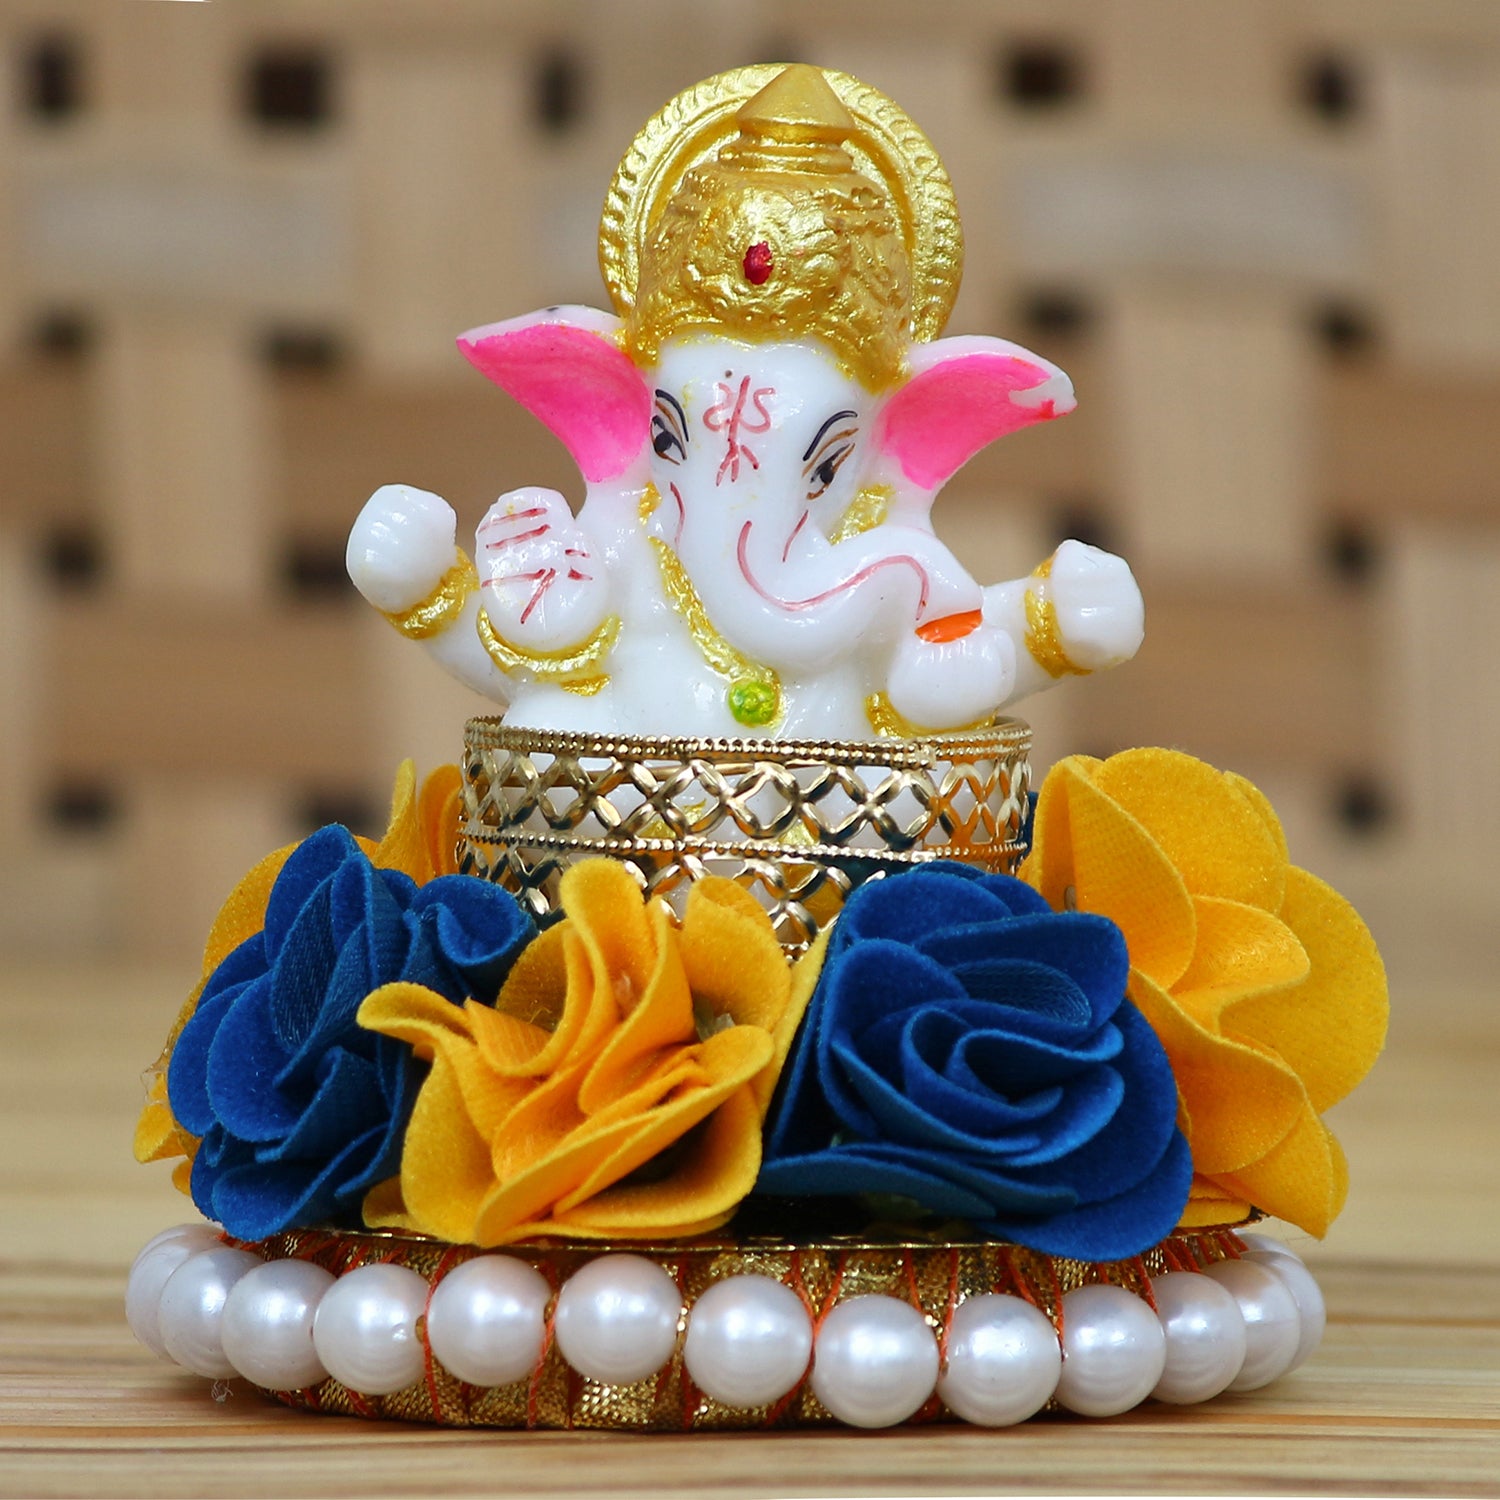 Lord Ganesha Idol on Decorative Handcrafted Plate with Yellow and Blue Flowers 1